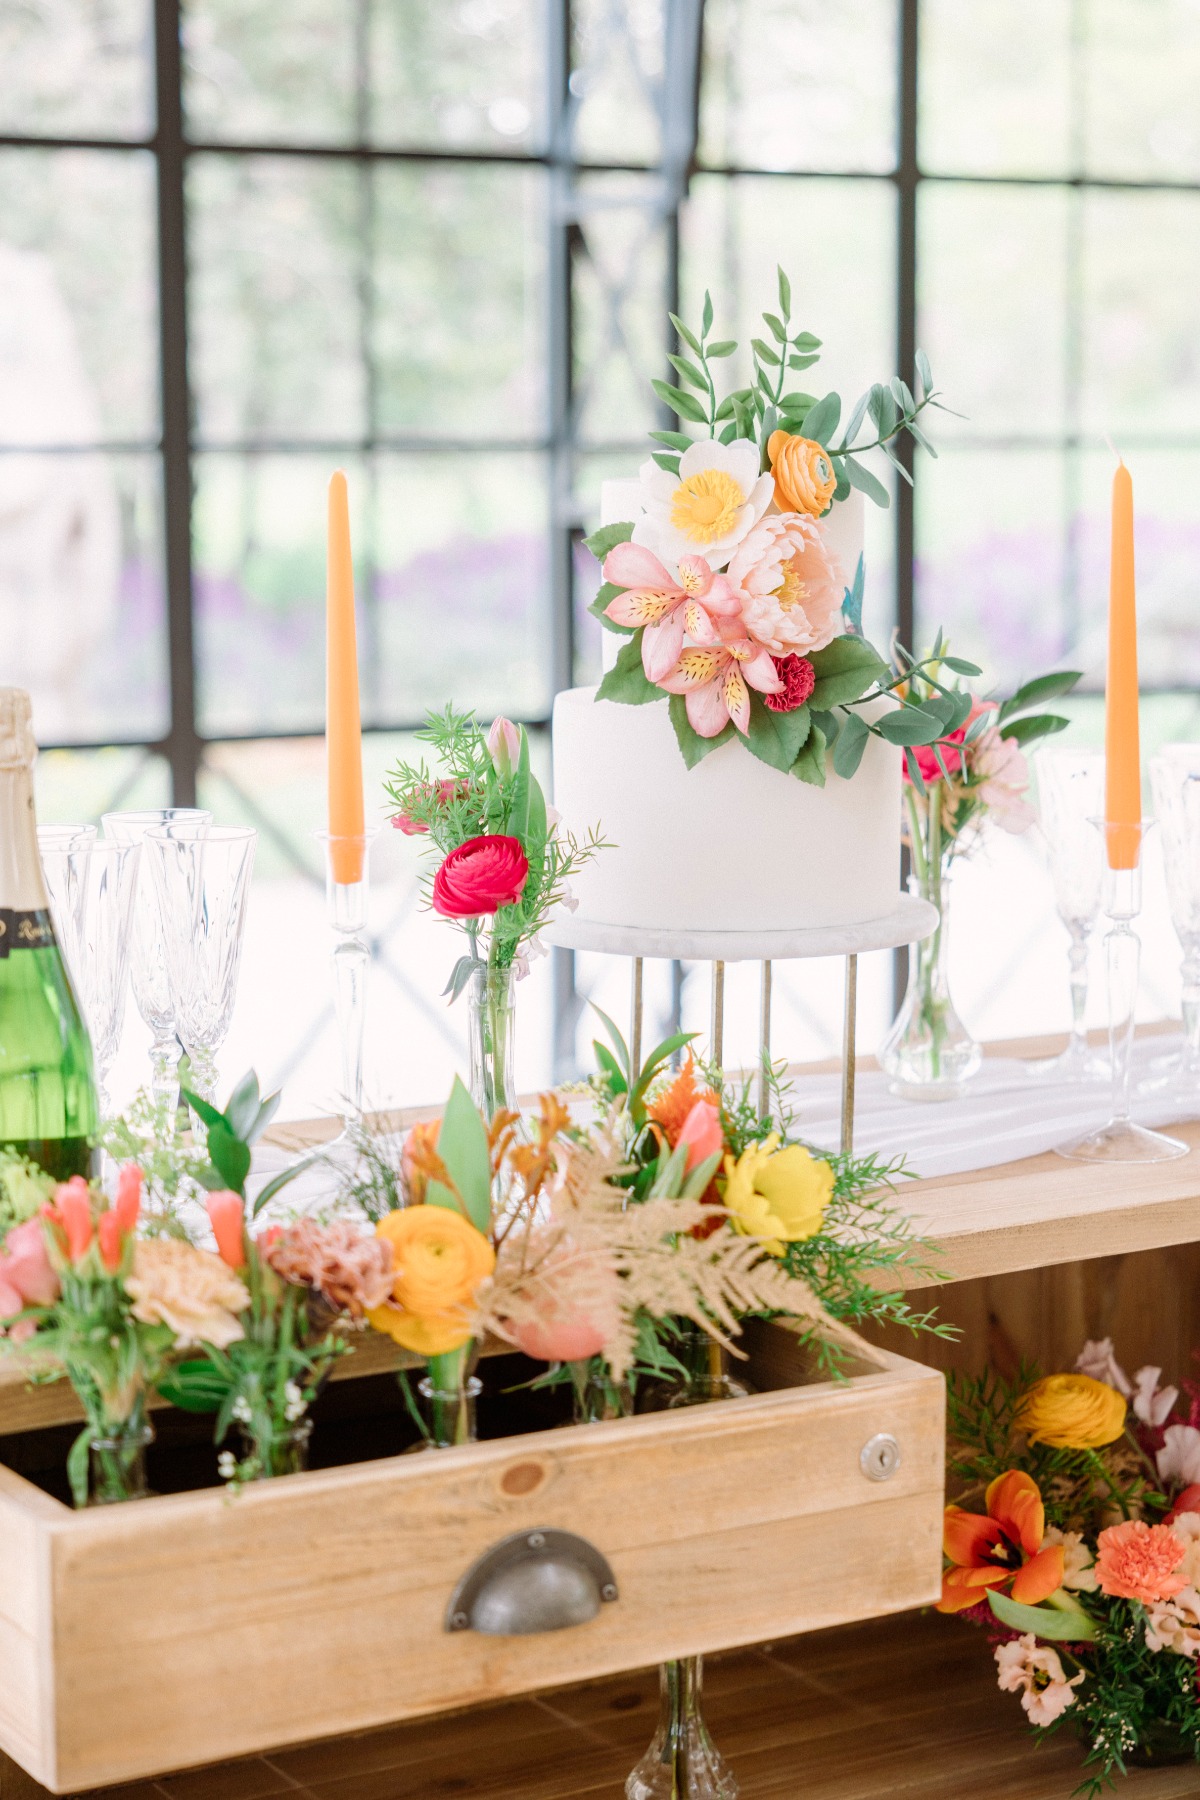 Your Venue Doesn't Dictate Your Color Palette